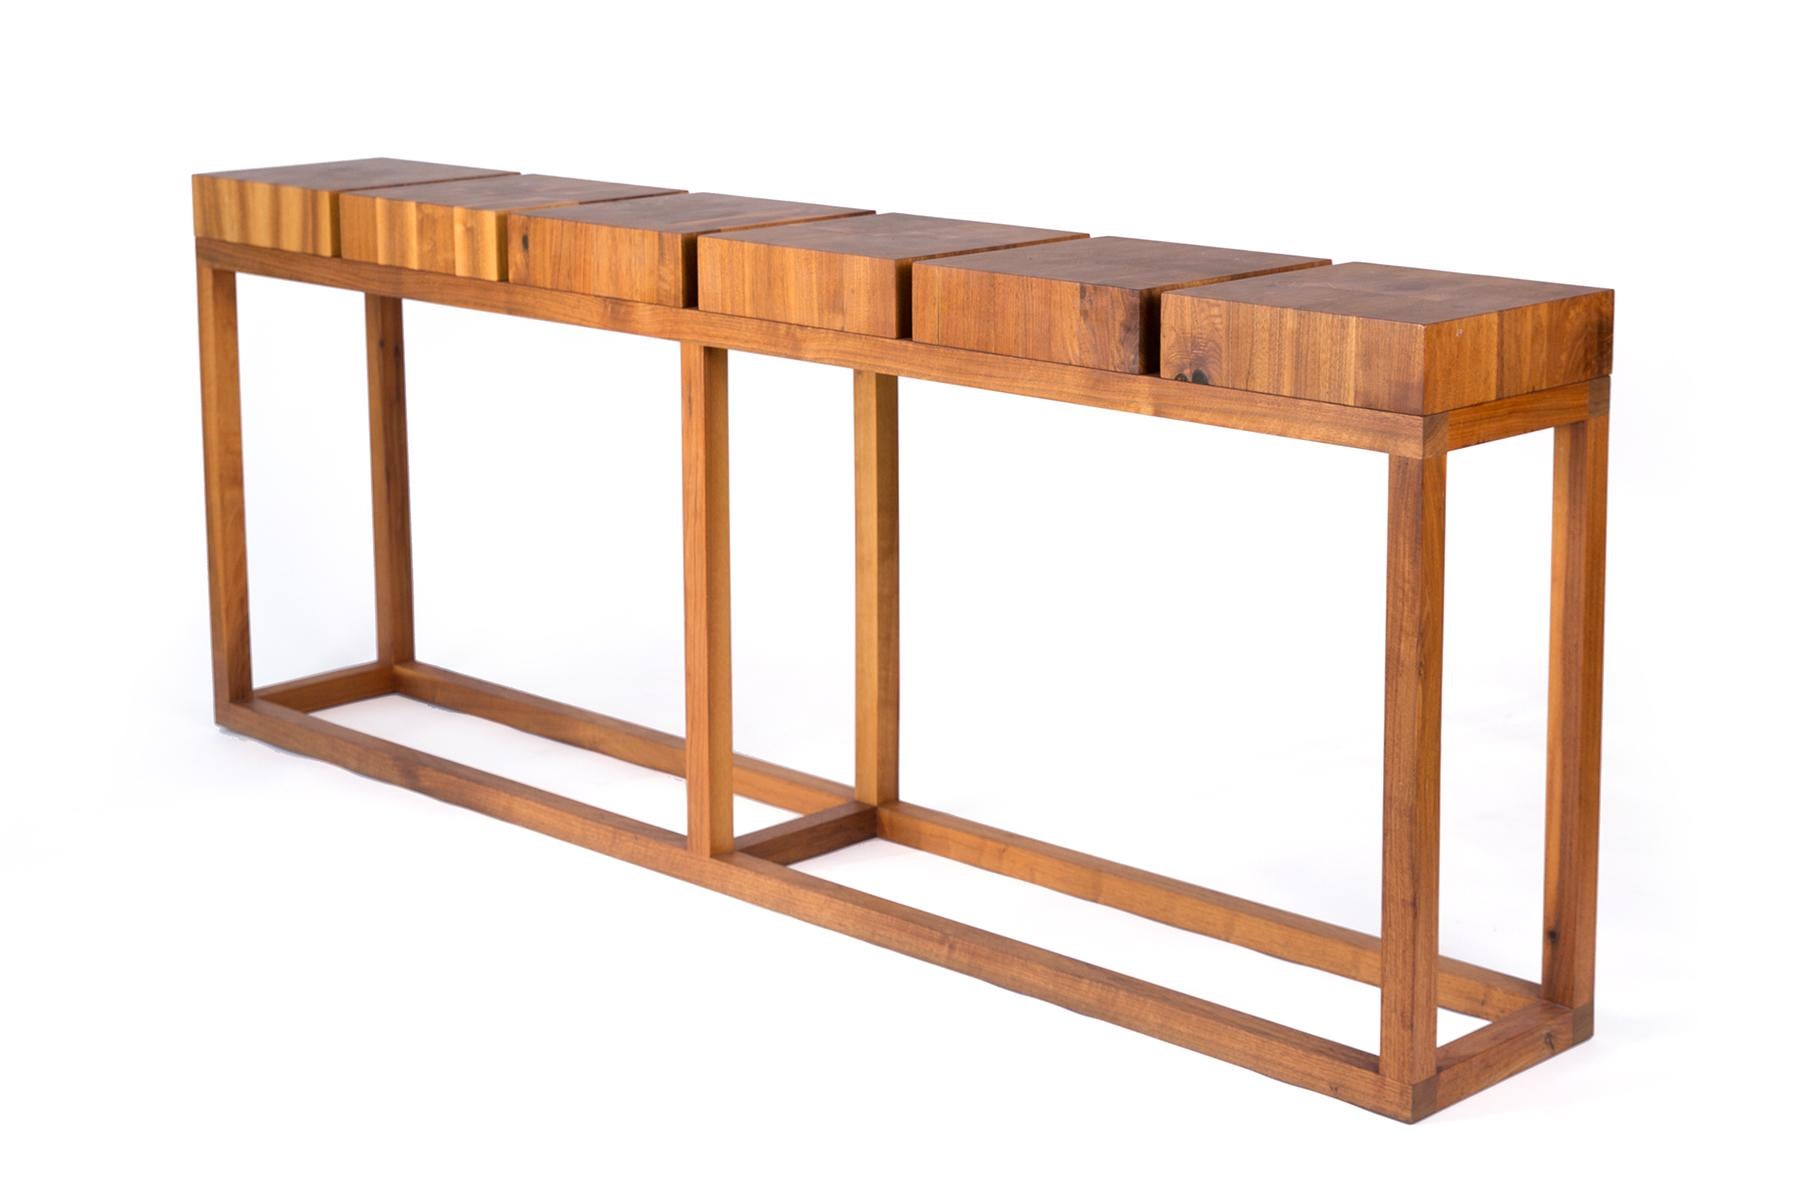 Clean modern lines matched with beautiful wood grain patterns make this distinctive solid walnut console table by Robert Bristow for Ralph Pucci a striking and versatile piece in any home. Console is signed by Bristow on the underside.